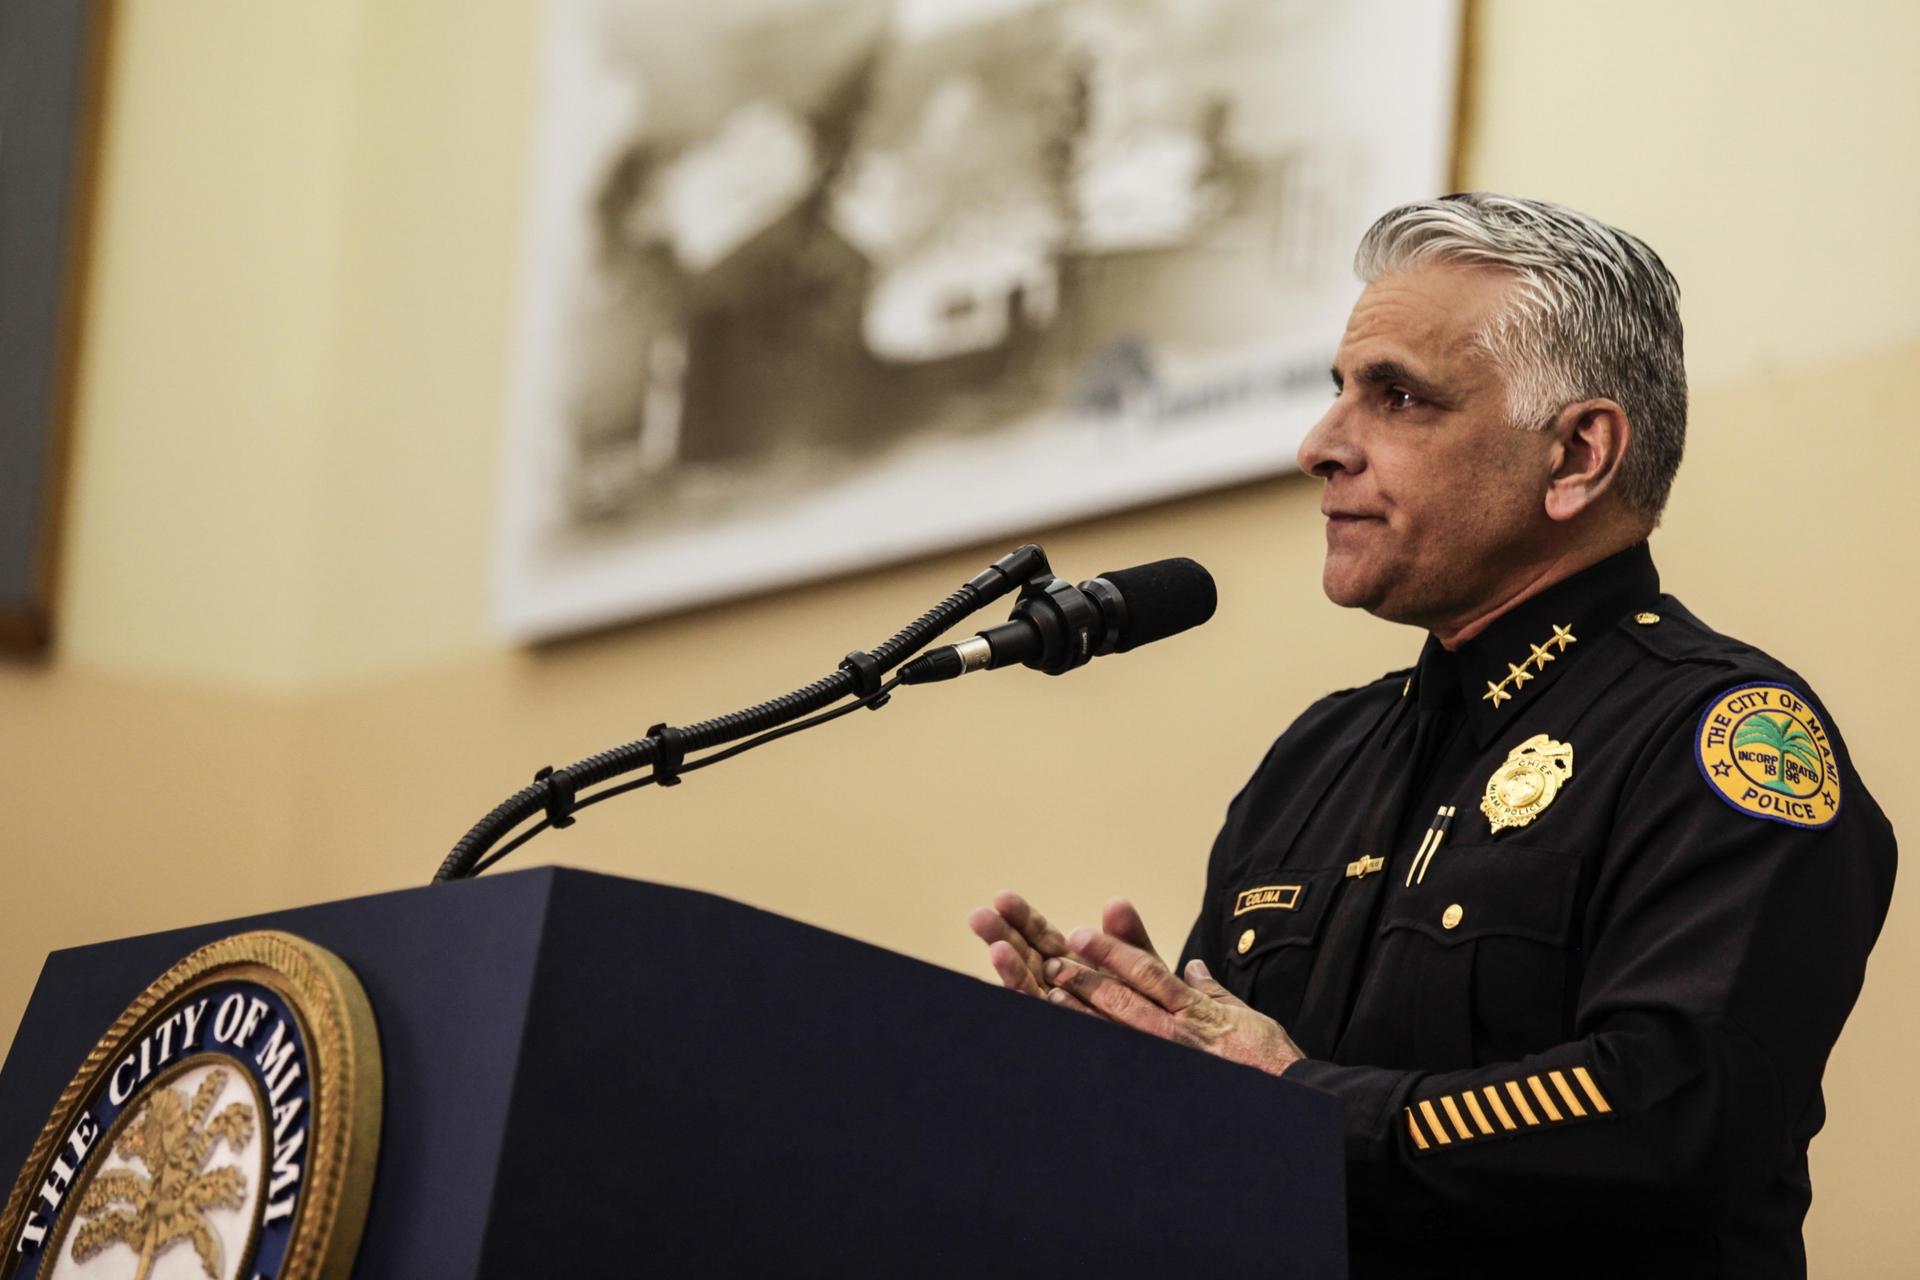 Miami Police Chief Jorge Colina said he wants to look into how his agency handles U visas following Reveal’s reporting.